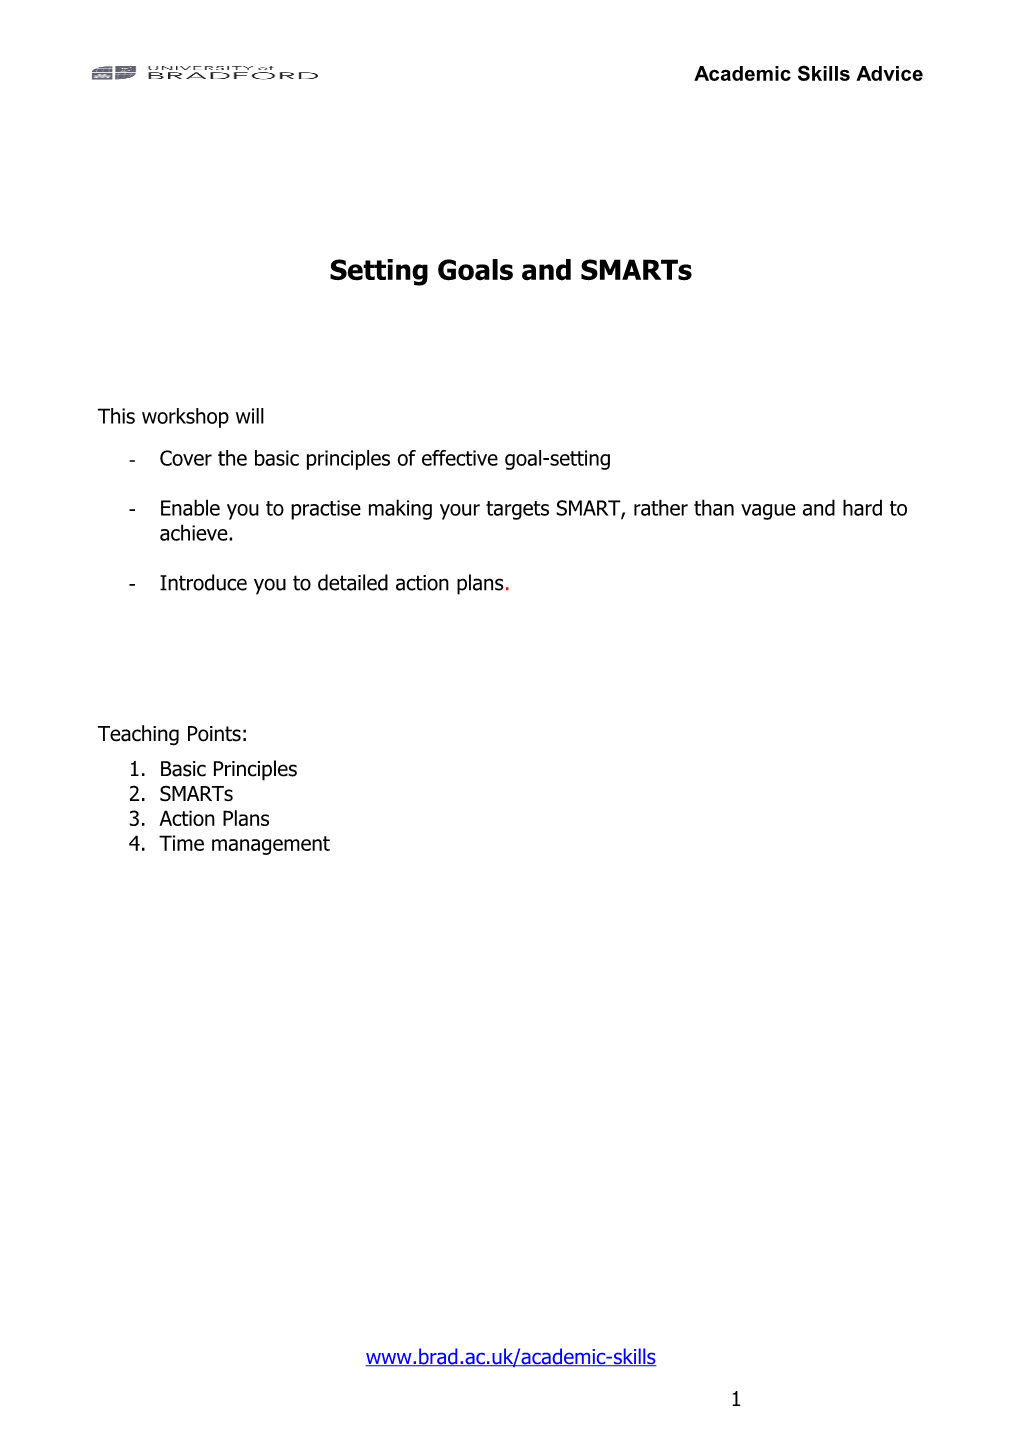 Setting Goals and Smarts